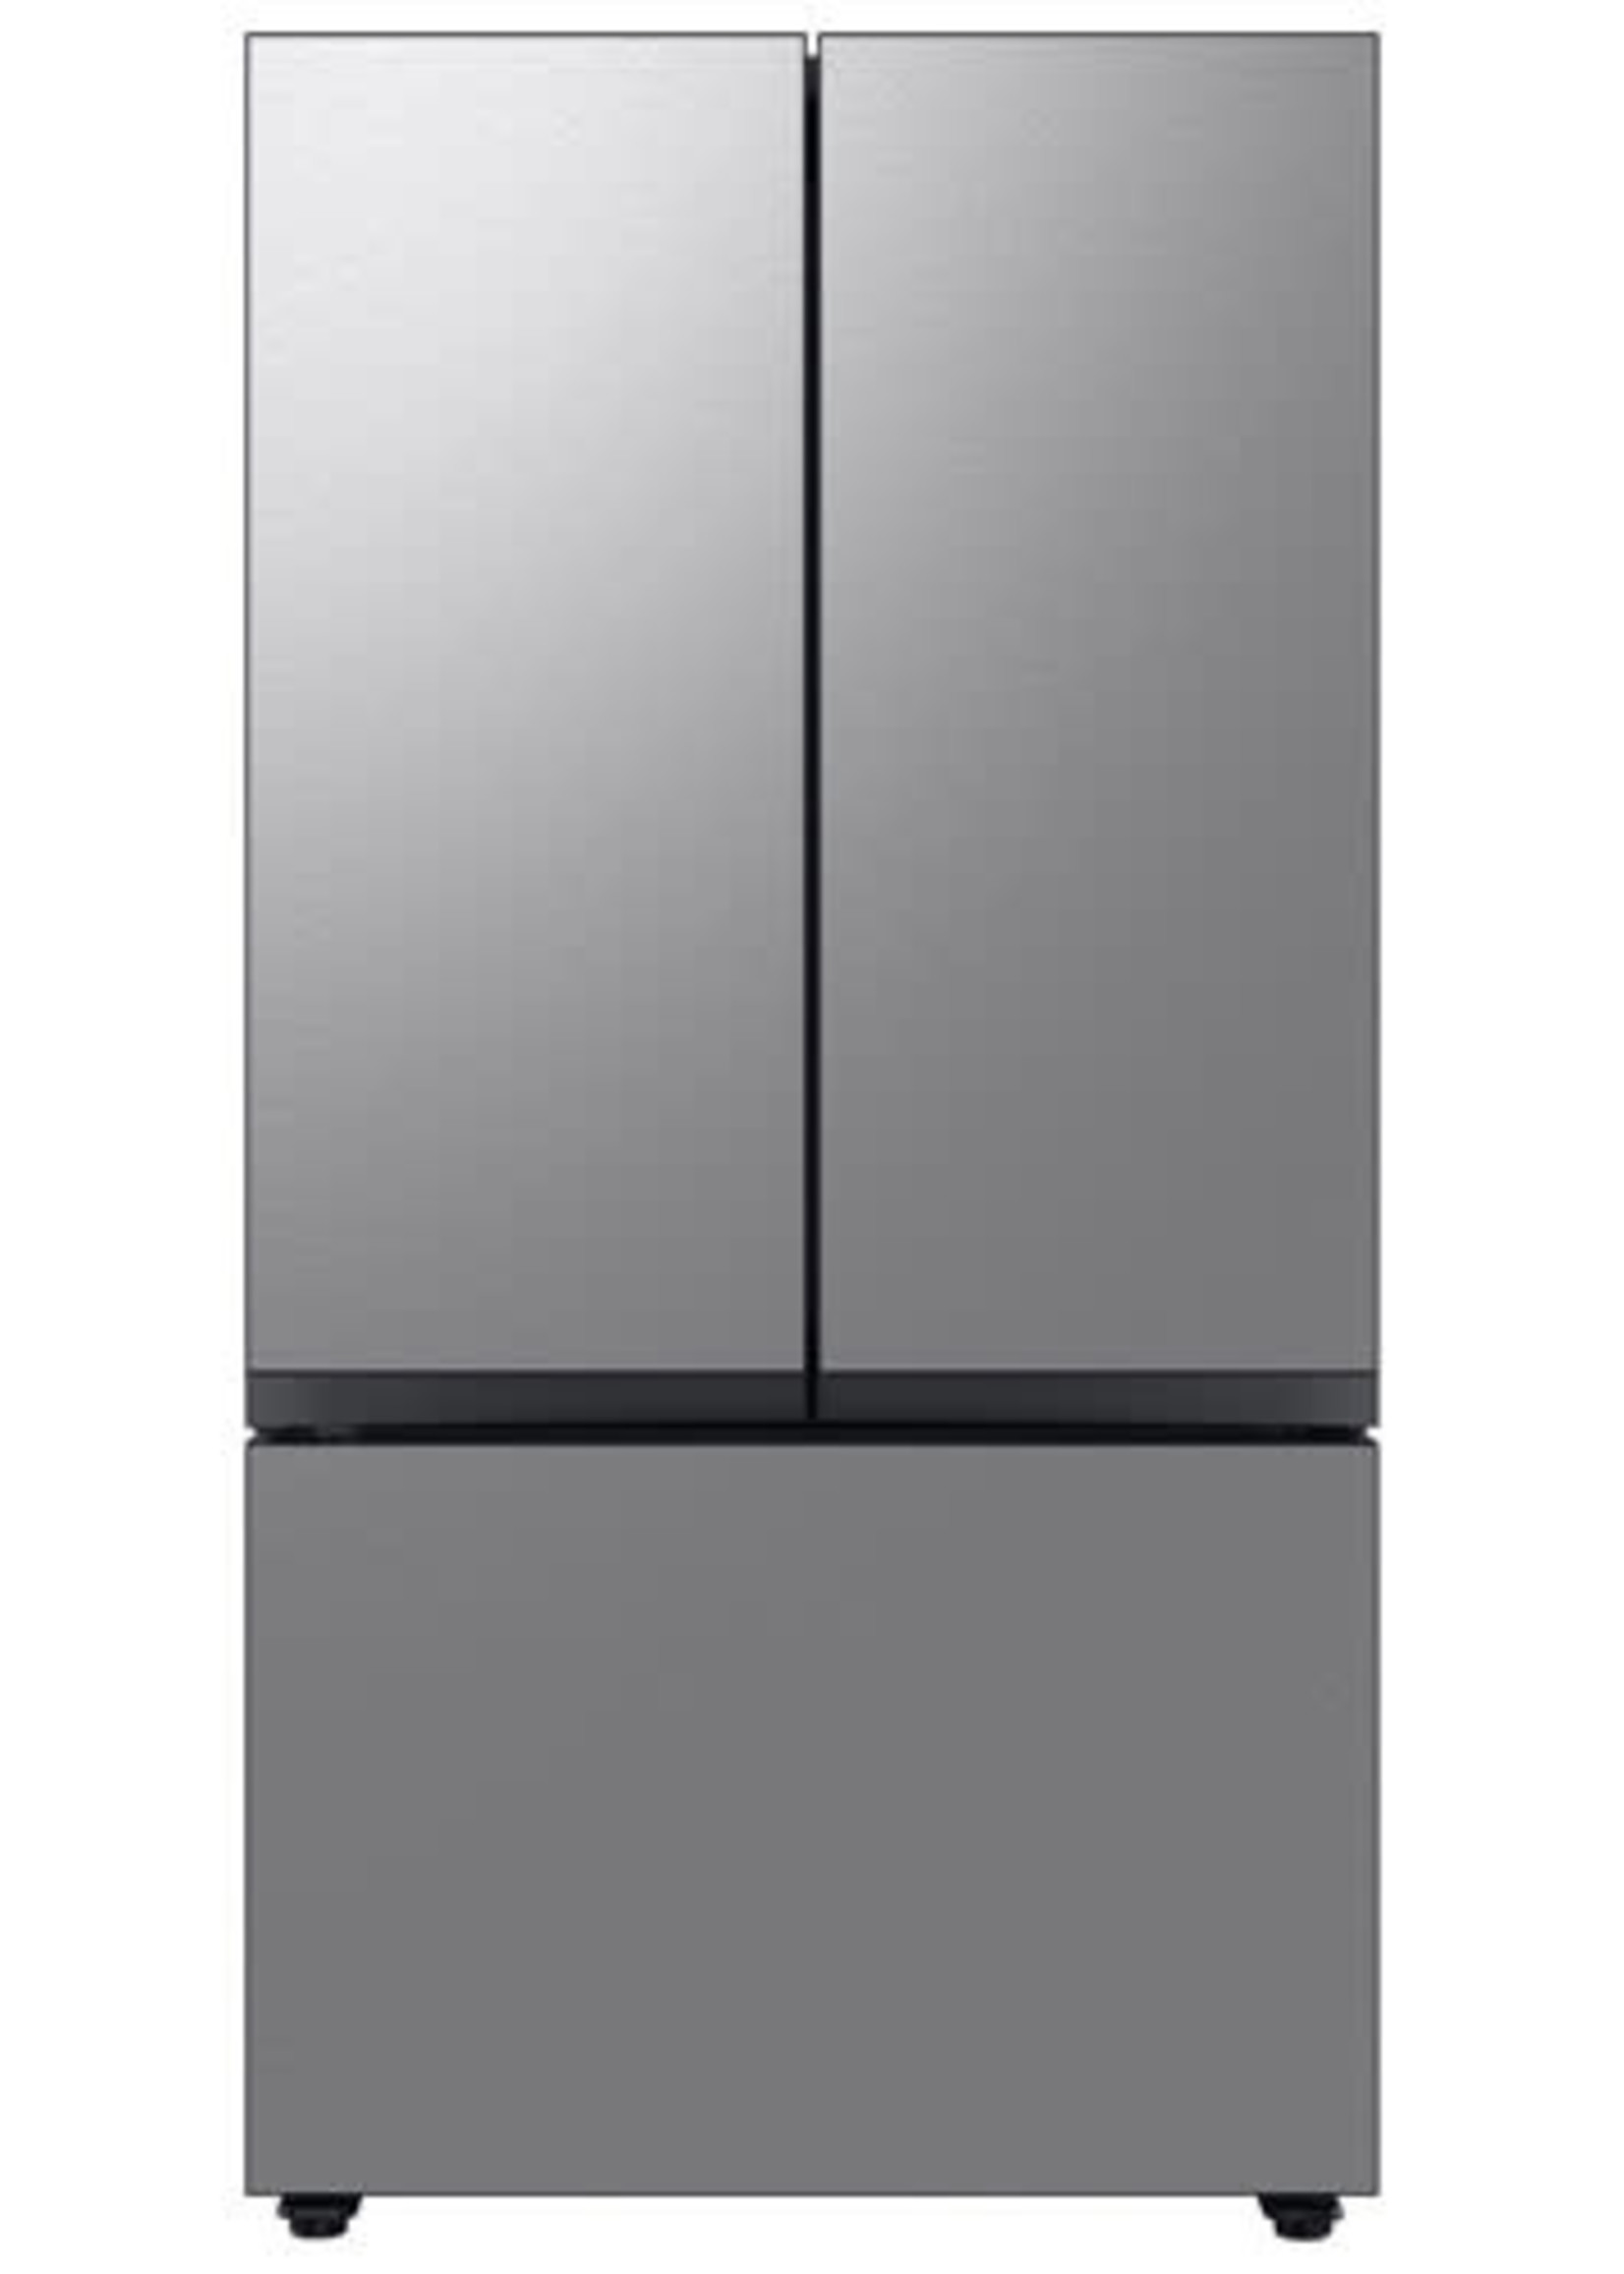 Samsung *Samsung RF30BB6200QL  Bespoke 30.1-cu ft French Door Refrigerator with Dual Ice Maker (Stainless Steel- All Panels) ENERGY STAR